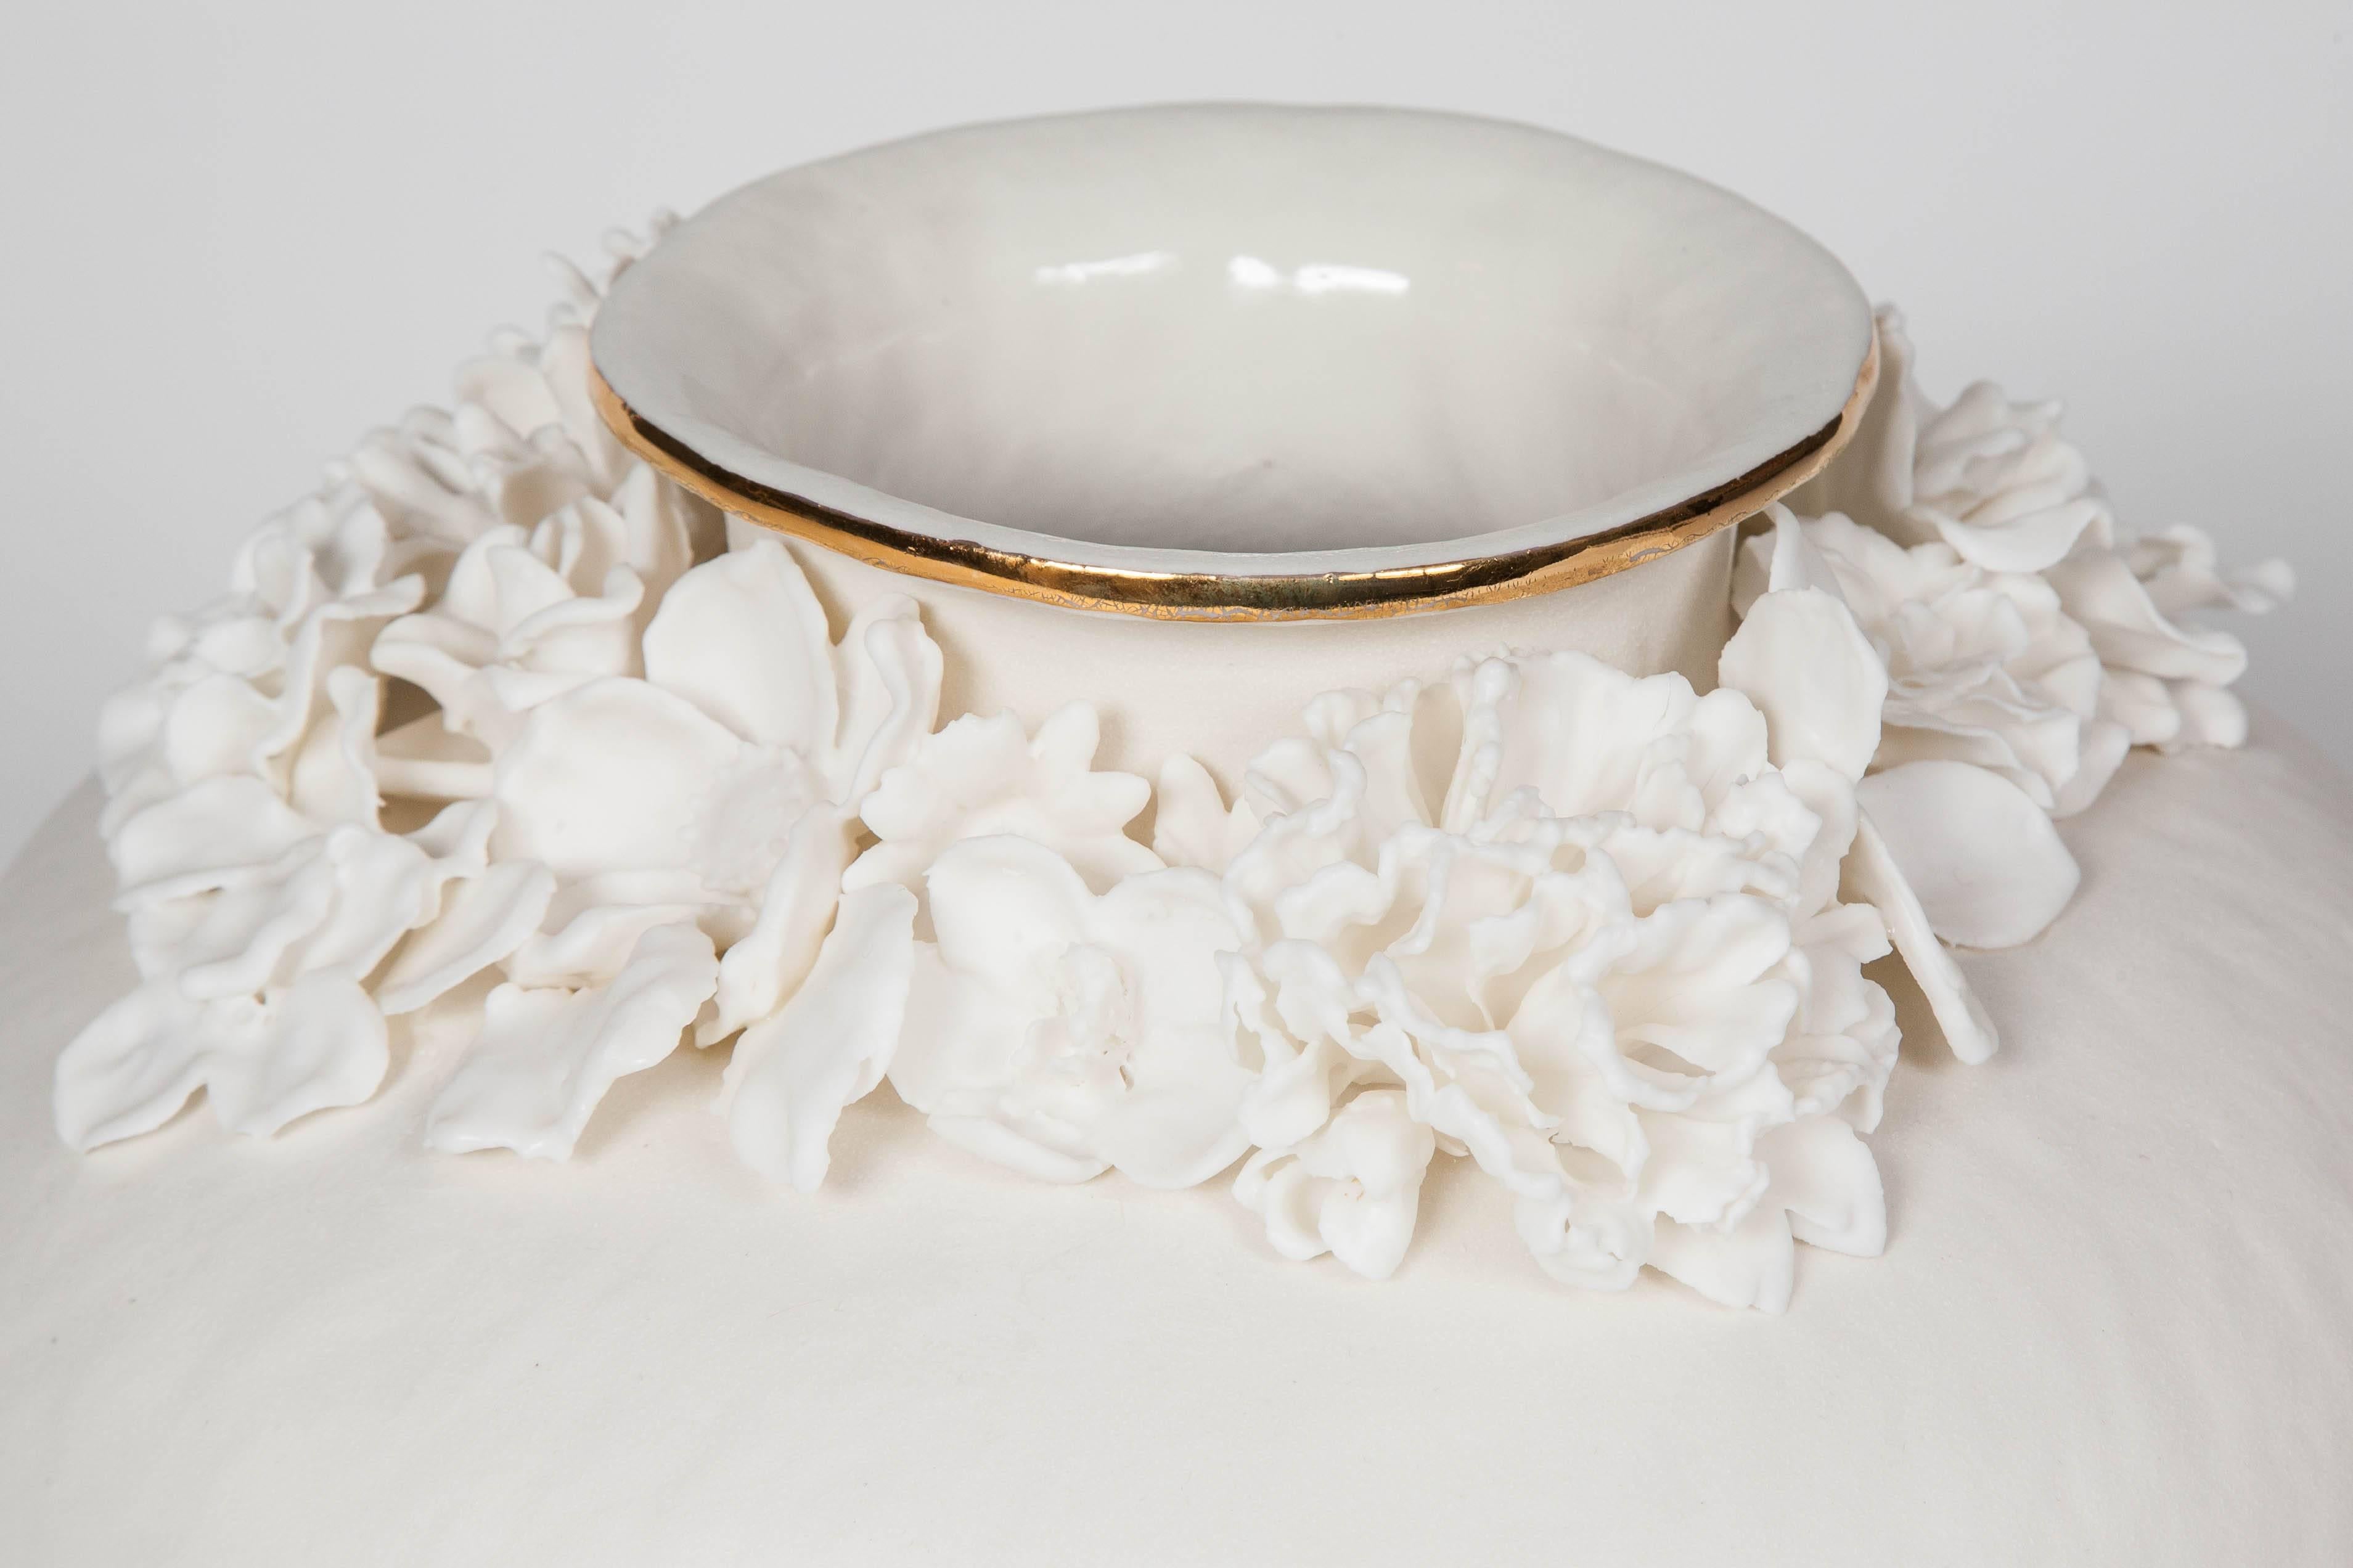 Hand coiled porcelain with Parian flowers and gold lustre detail.

Working as ceramic artist, Hughes specializes in hand building, enjoying working with form and texture and studying its relation to decoration. Her practice is both fueled by and